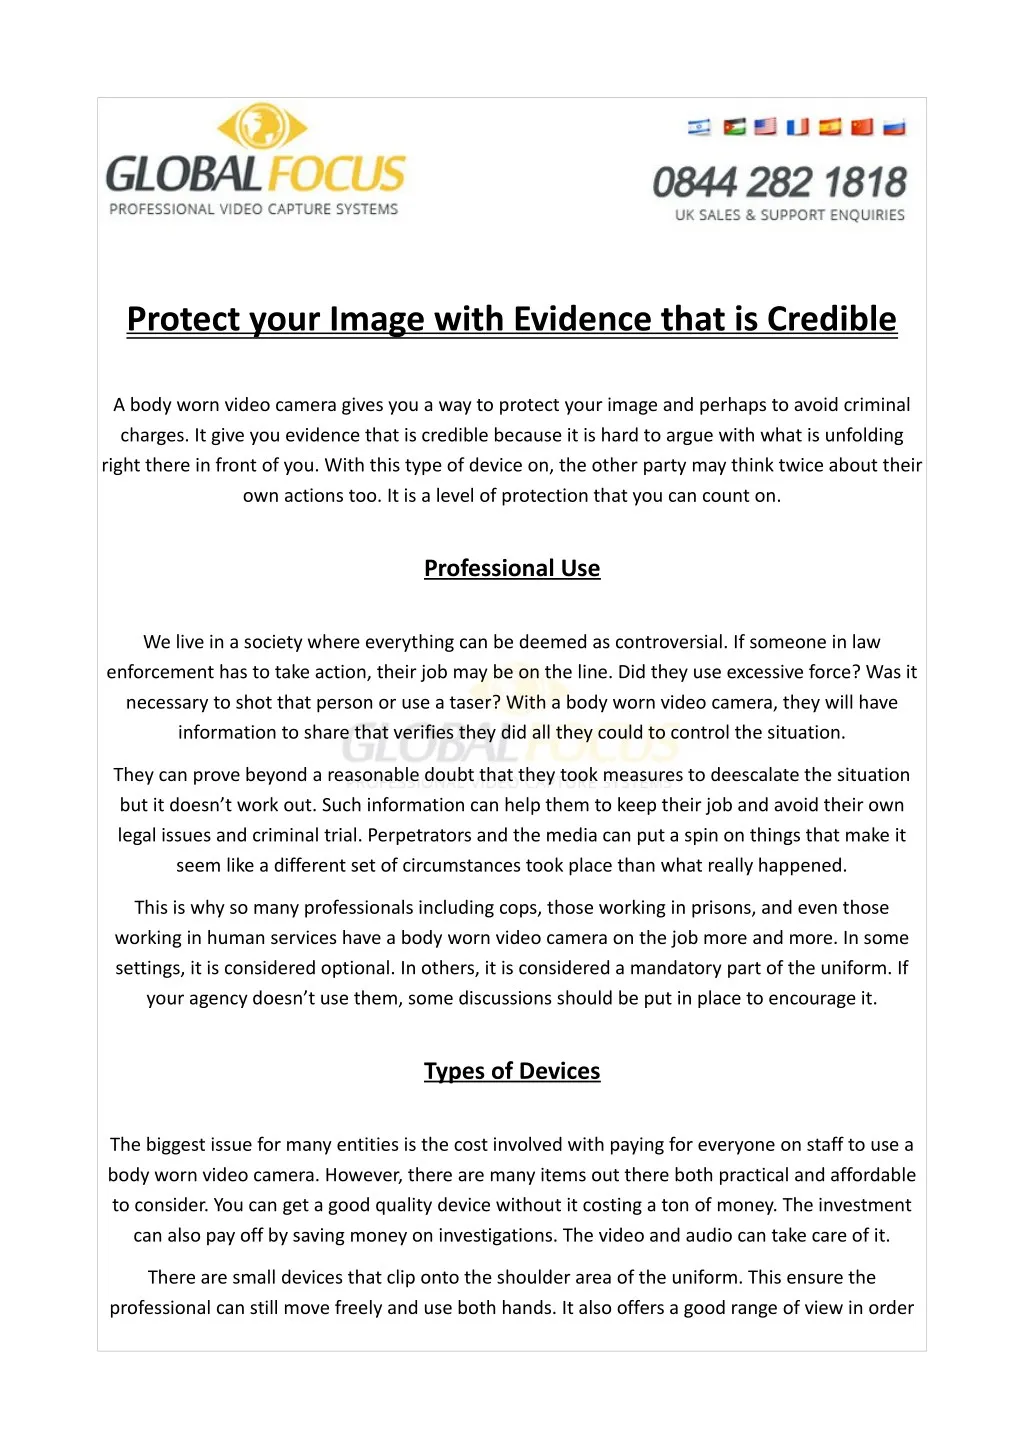 protect your image with evidence that is credible